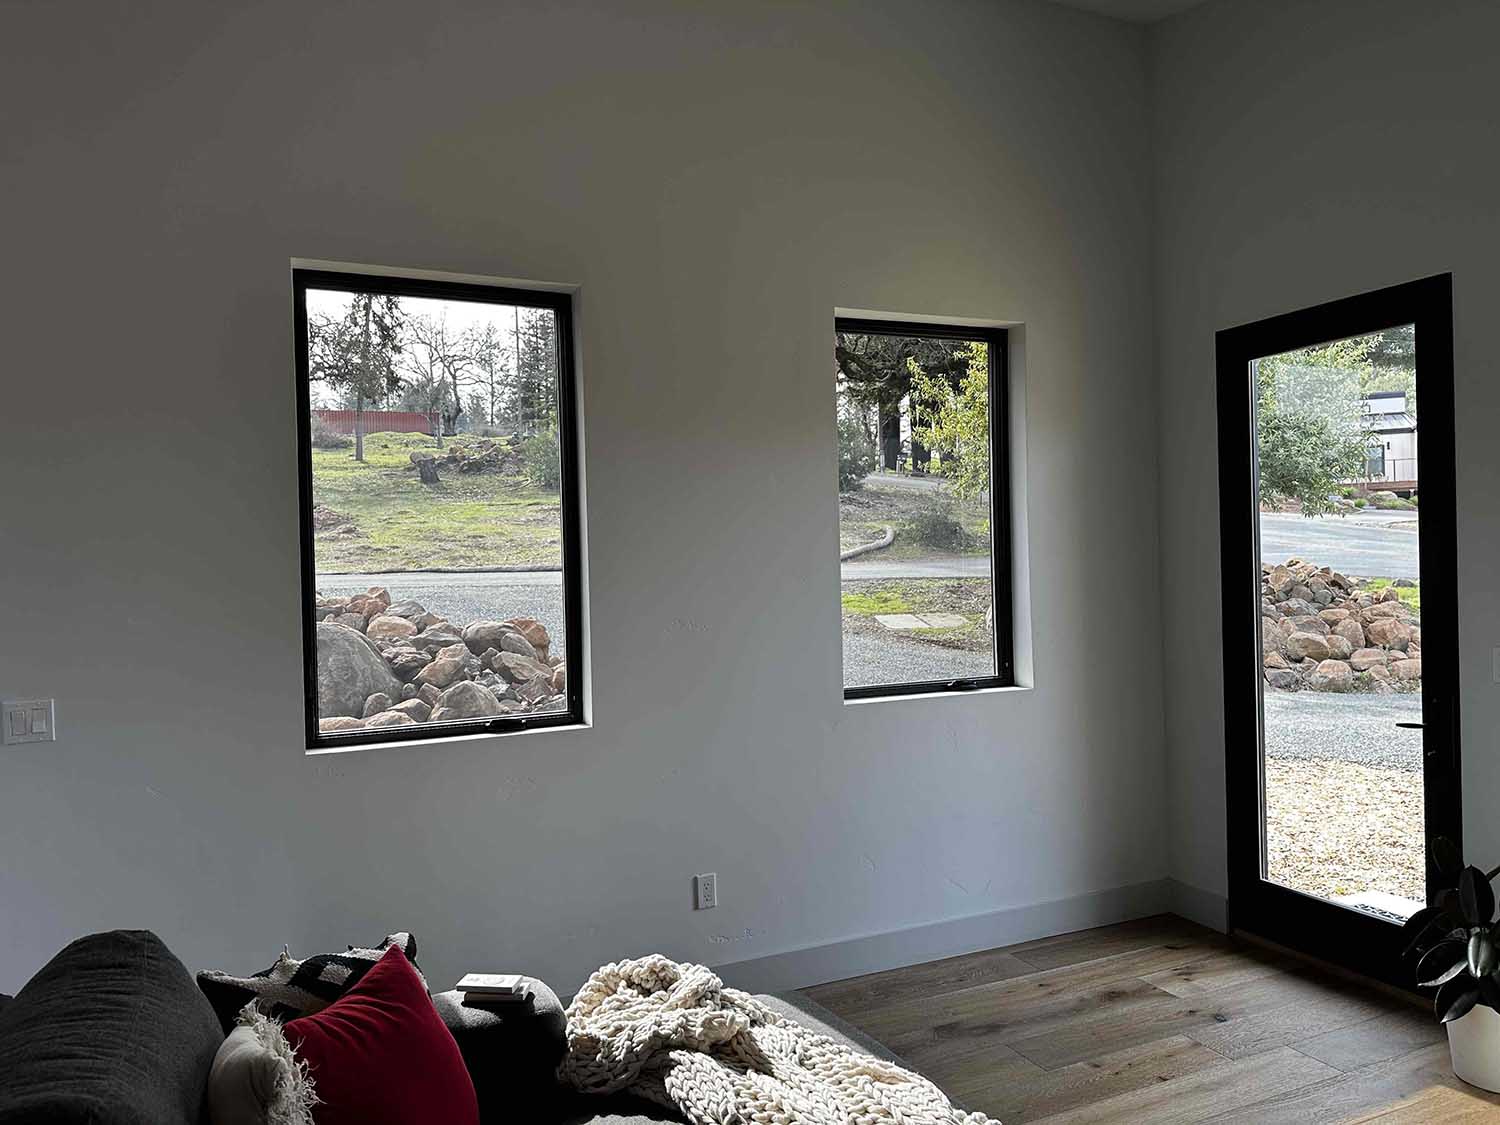 3M Night Vision Window Film is one of the best for homeowners in Santa Rosa, CA. Professionally installed by ClimatePro.